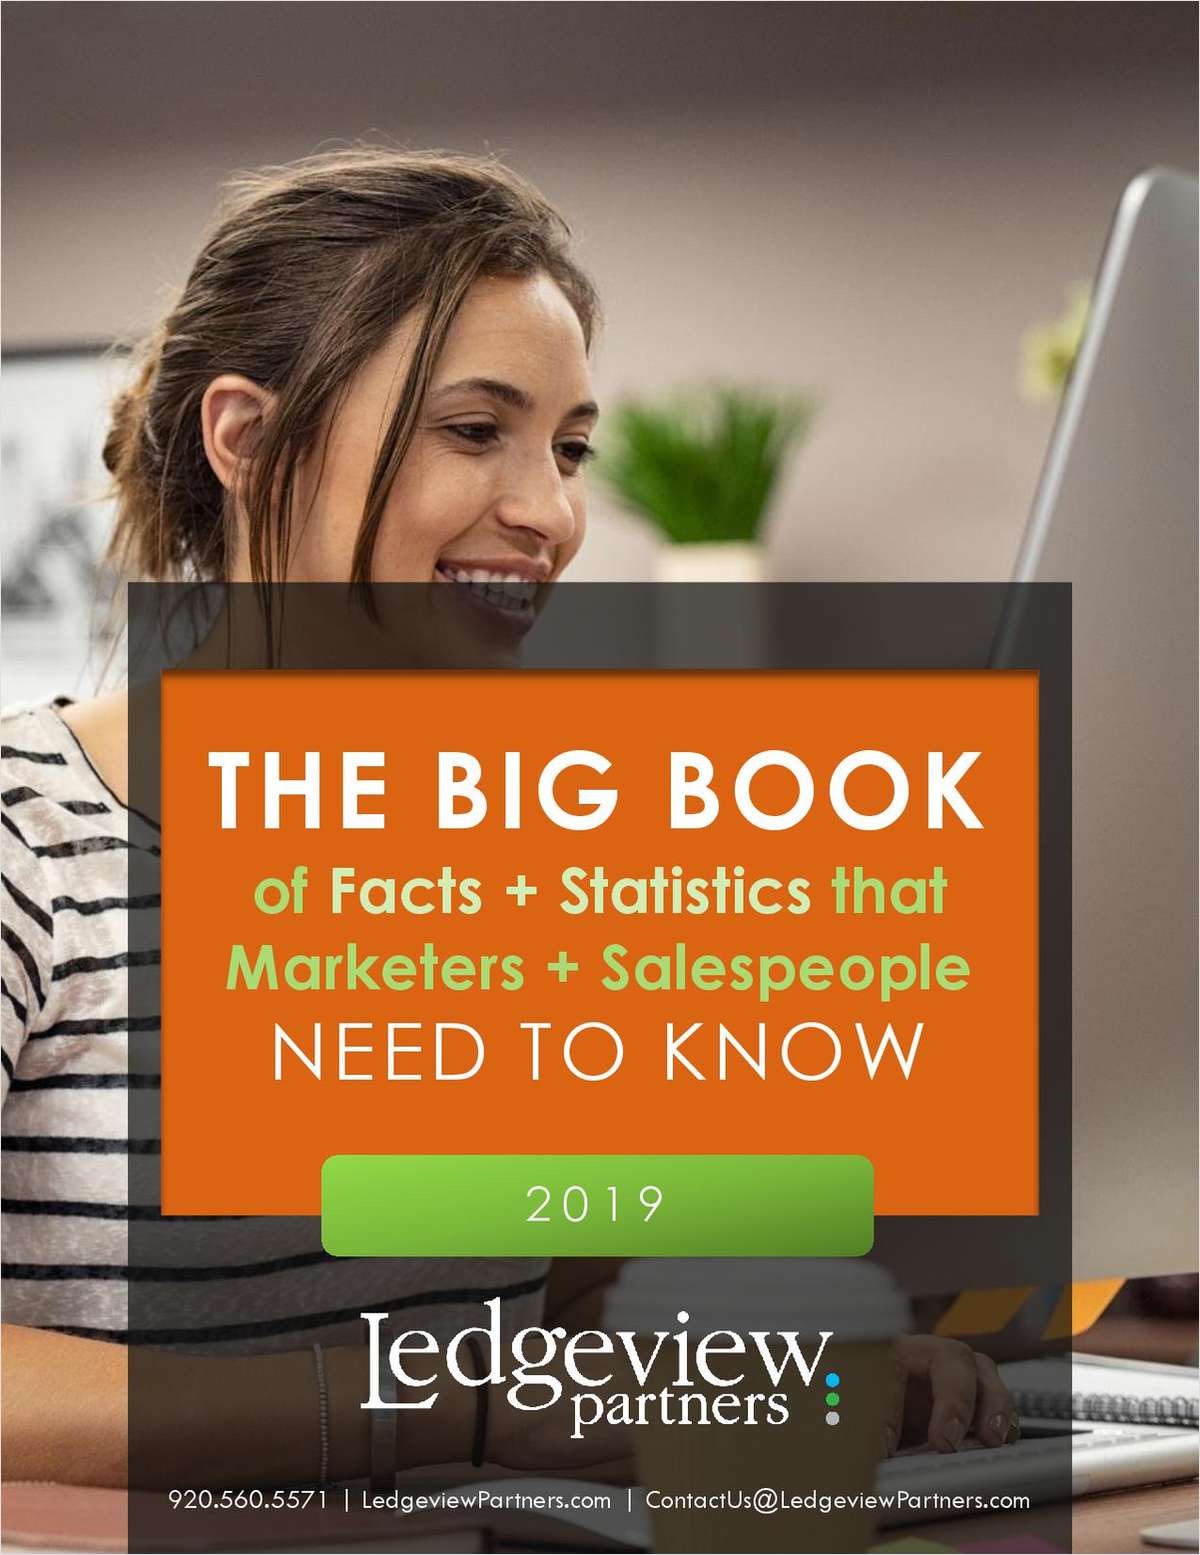 The Big Book of Facts and Statistics that Salespeople and Marketers Should Know in 2019